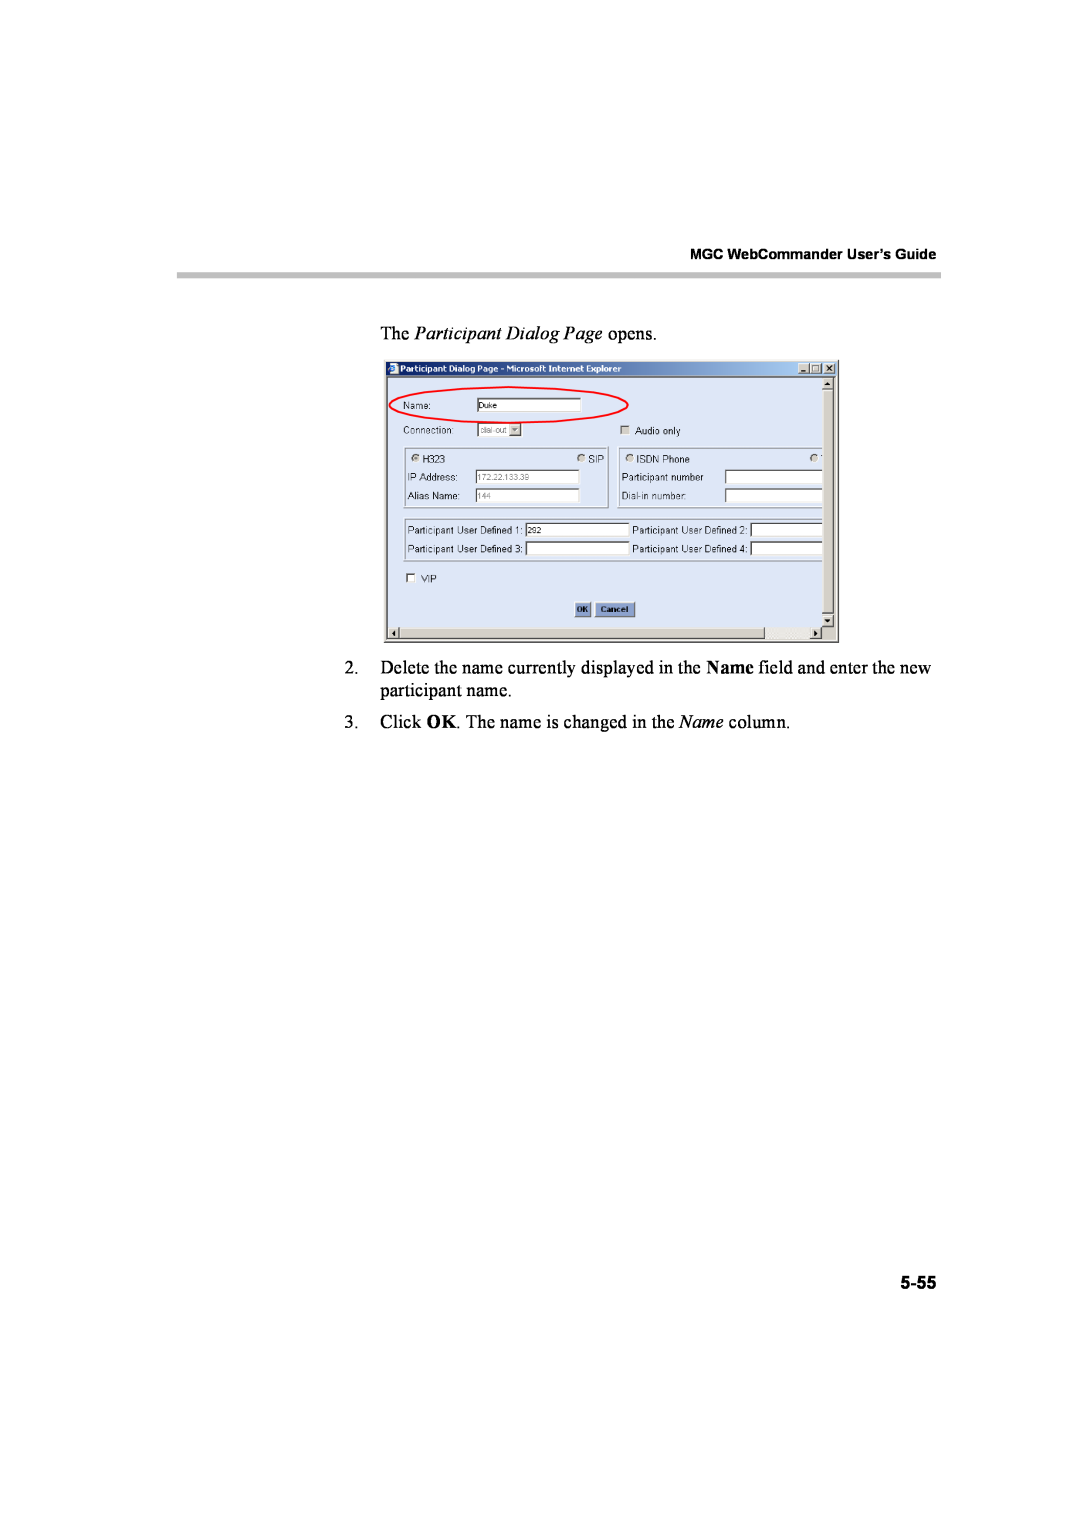 Polycom 8 manual The Participant Dialog Page opens, 5-55, MGC WebCommander User’s Guide 